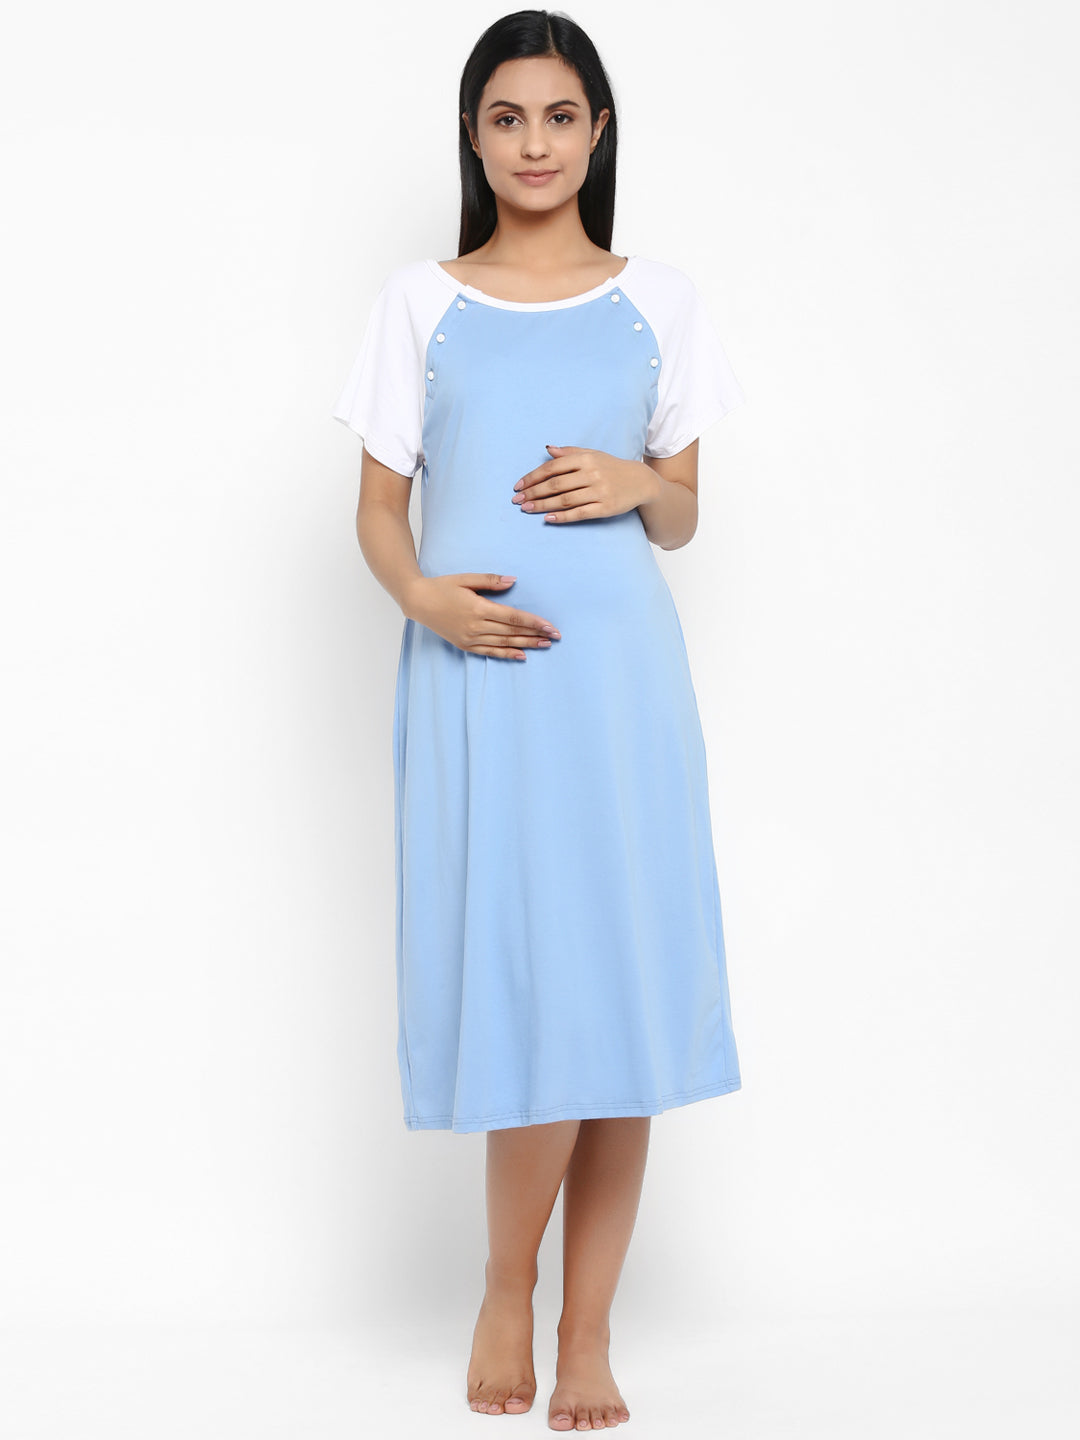 Bhome Maternity Labor Delivery Gown Hospital Nightgown Nursing Nightdress  With Matching Pillowcase | Cute maternity dresses, Breastfeeding fashion  outfits, Stylish maternity outfits